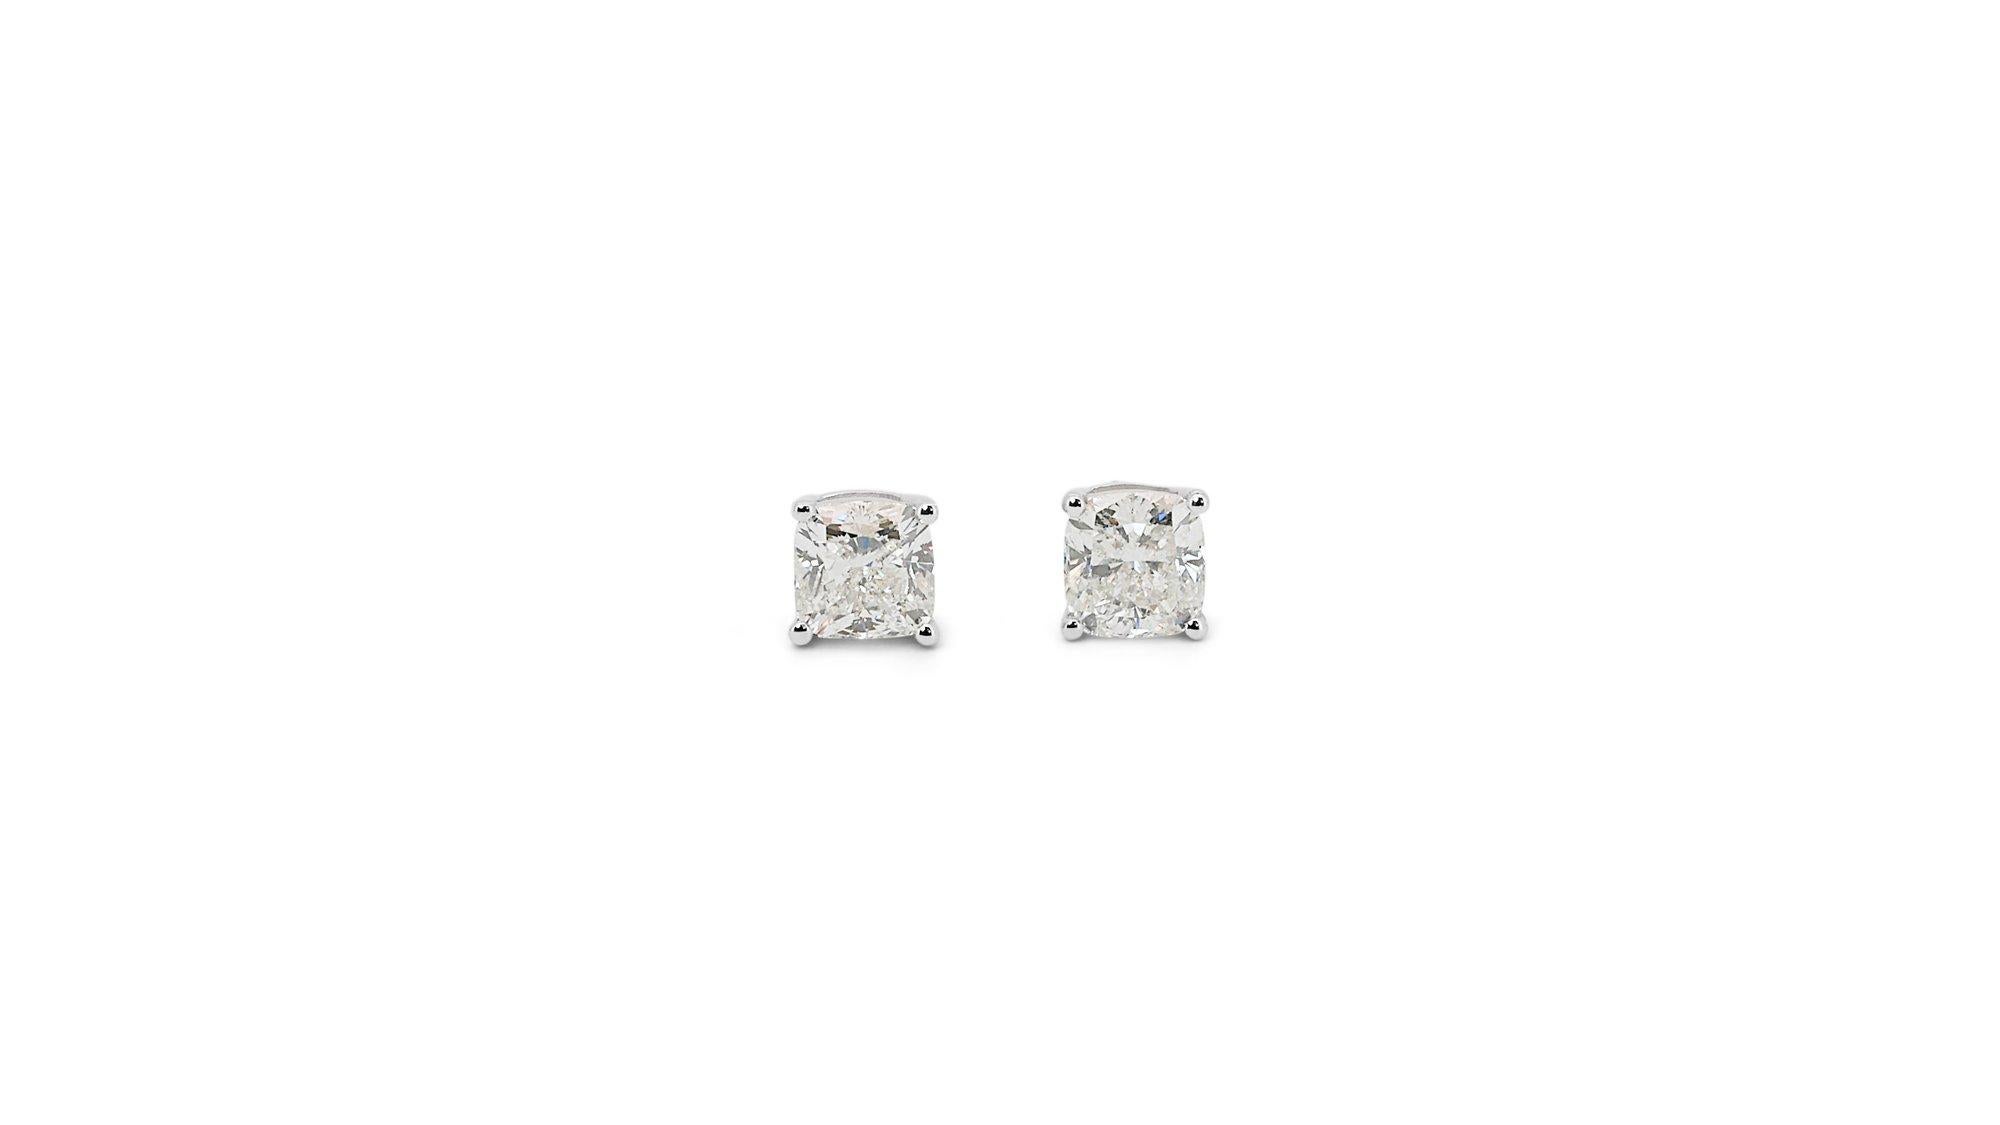 A beautiful pair of stud earrings with dazzling 2.01-carat cushion shape diamonds. The jewelry is made of 18K White Gold with a high-quality polish. It comes with an AIG certificate and a fancy jewelry box.

2 diamonds main stones total of 2.01